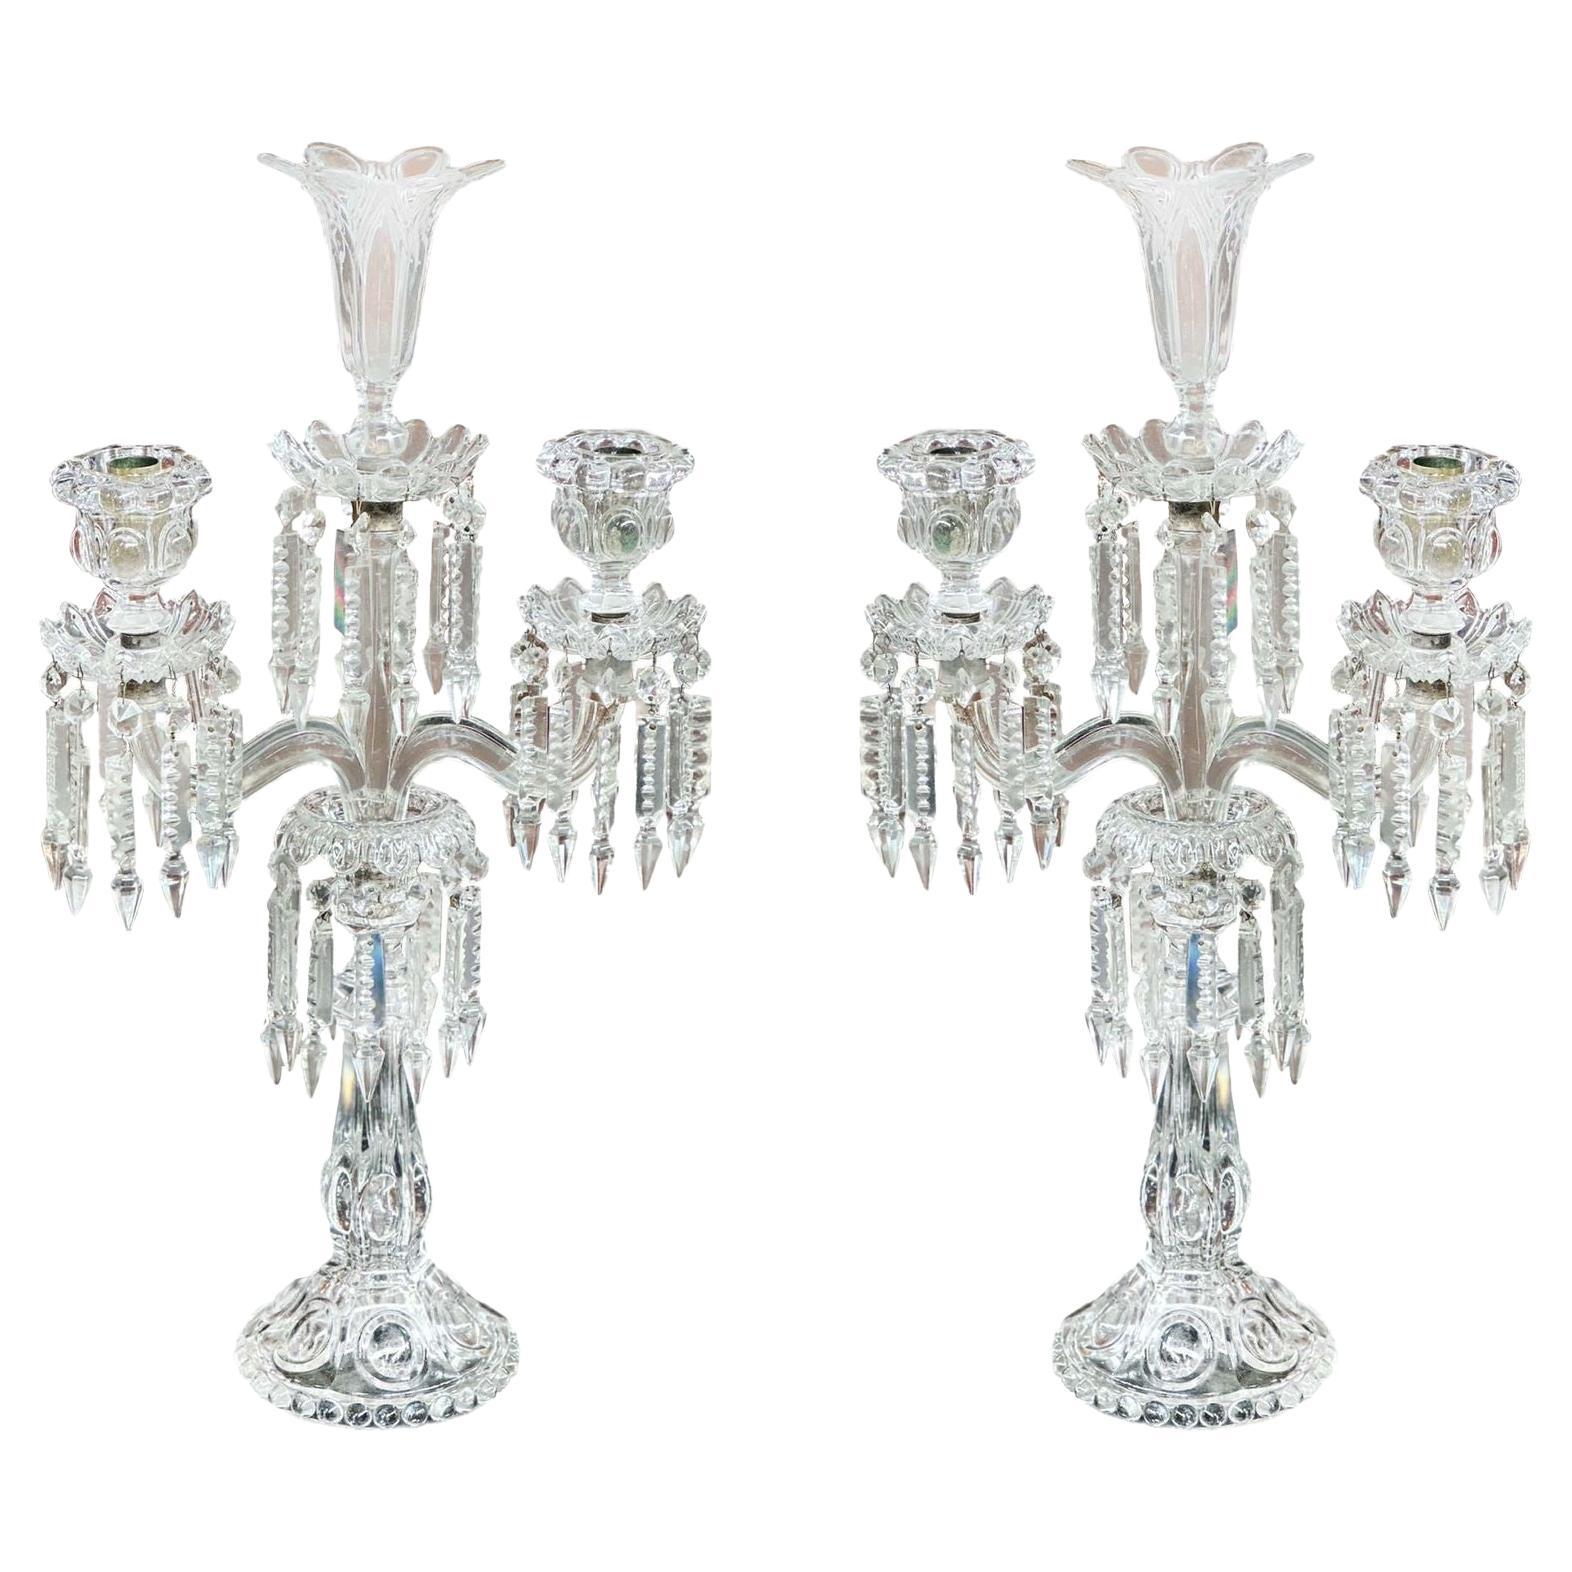 Pair of 19th Century Glass Obelisk Candelabras by Baccarat For Sale